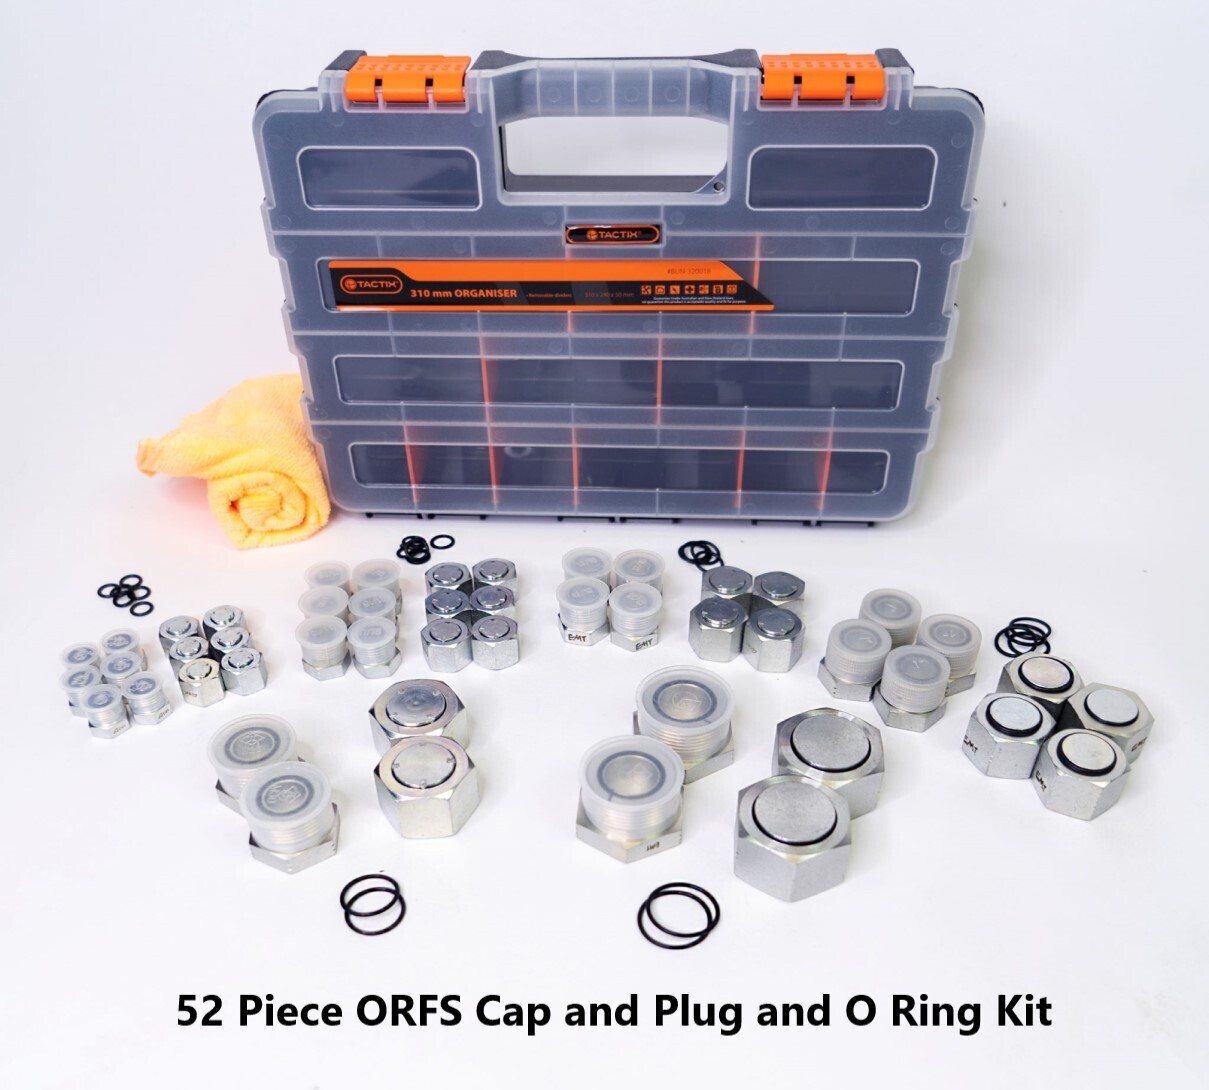 ORFS Plug and Caps Kit contents chart